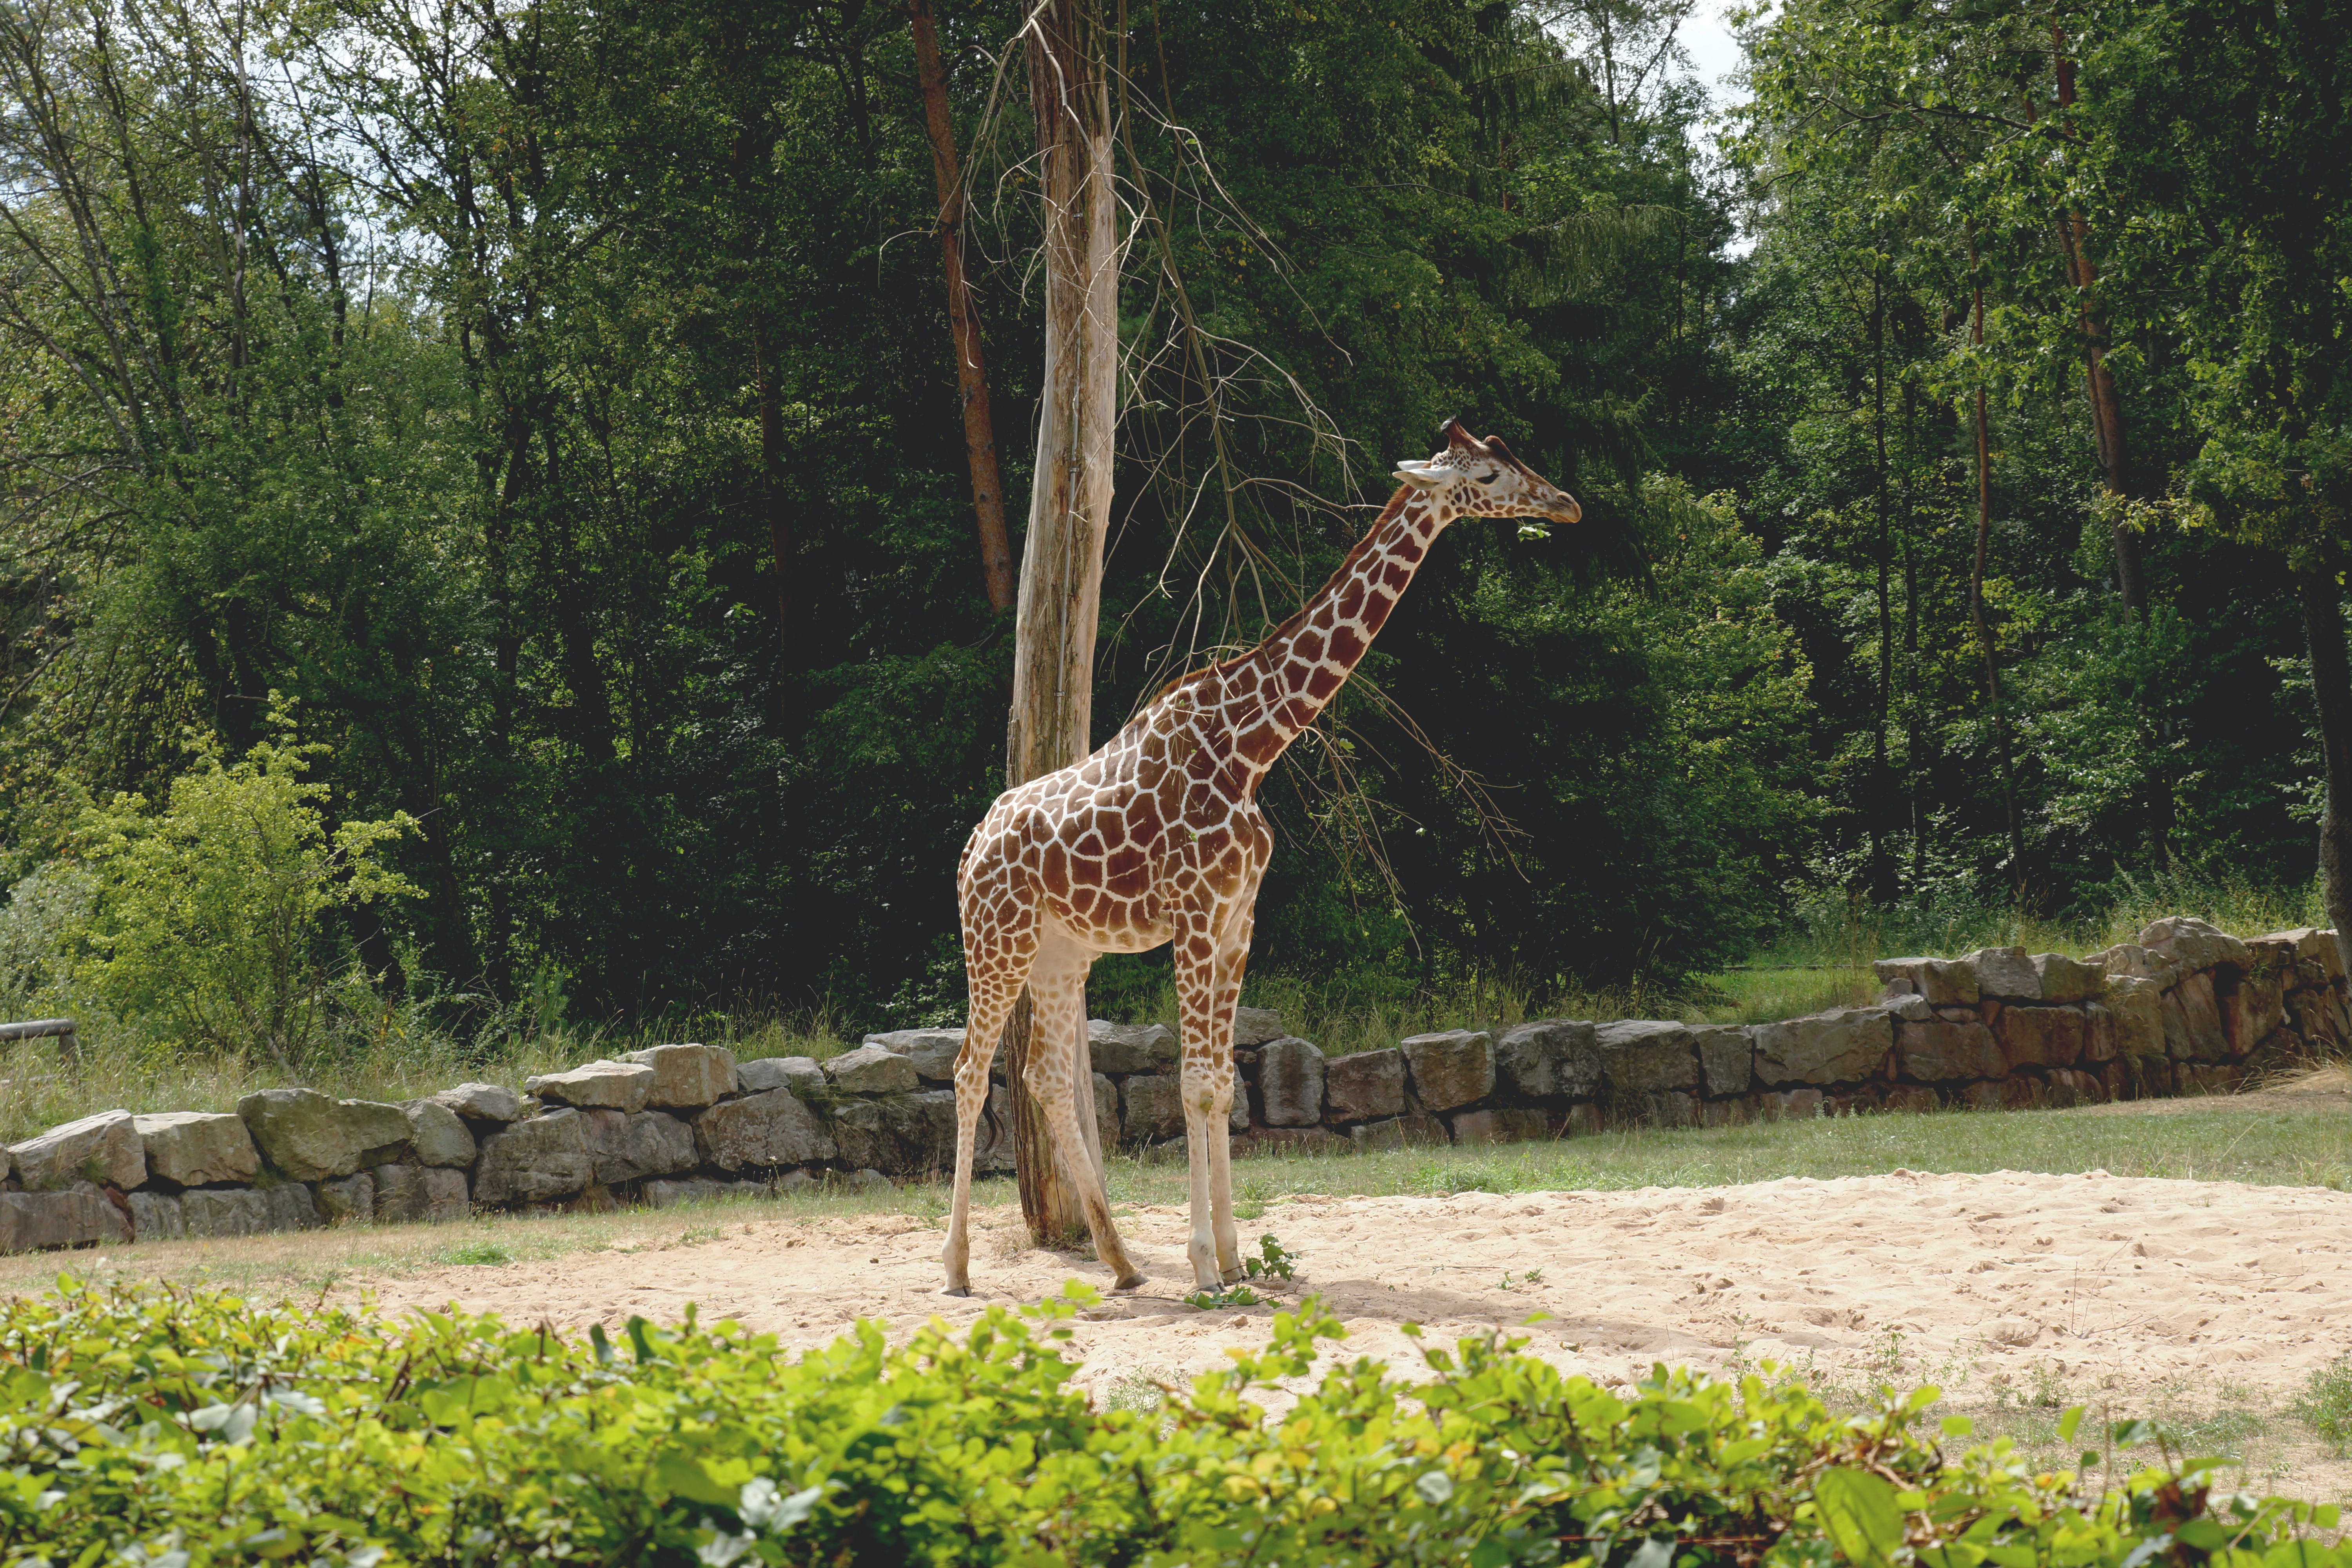 Enjoy a Walk on the Wild Side at the Franklin Park Zoo in Boston